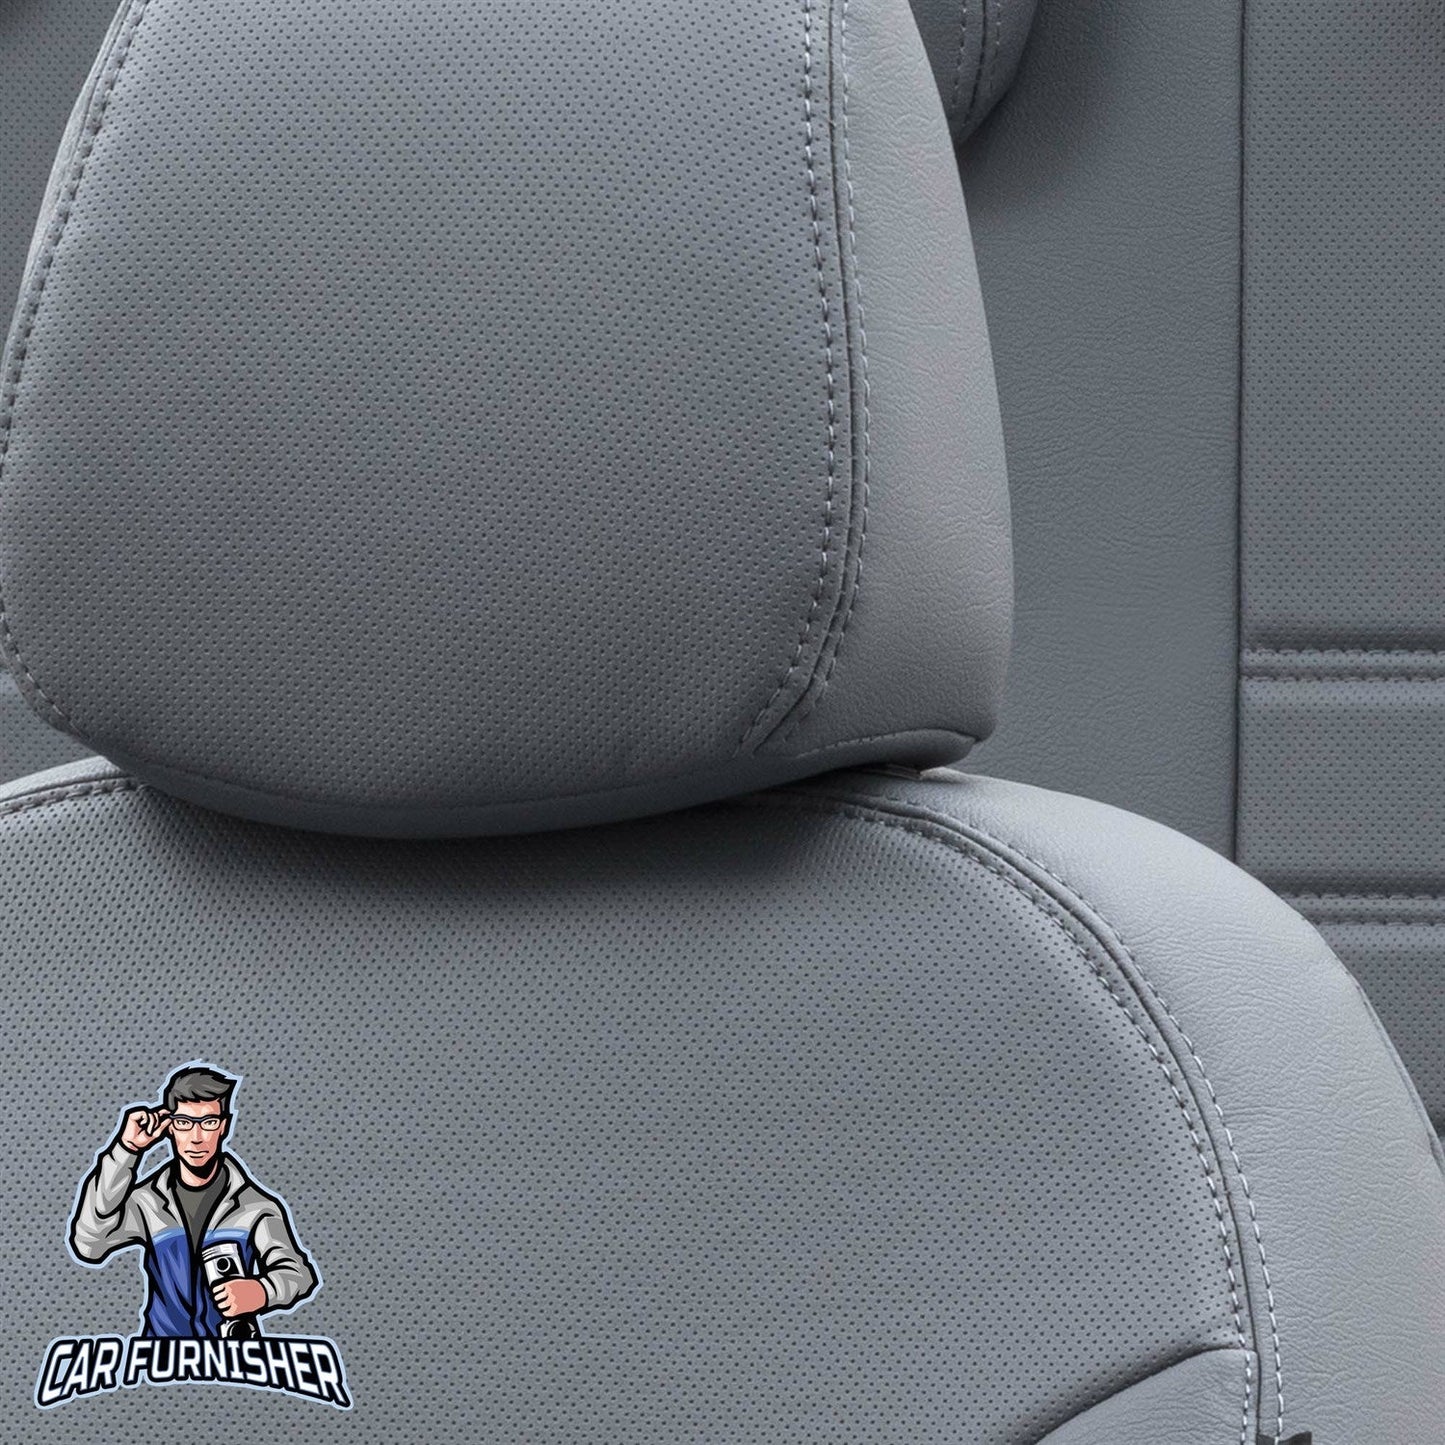 Chevrolet Cruze Seat Covers Istanbul Leather Design Smoked Leather